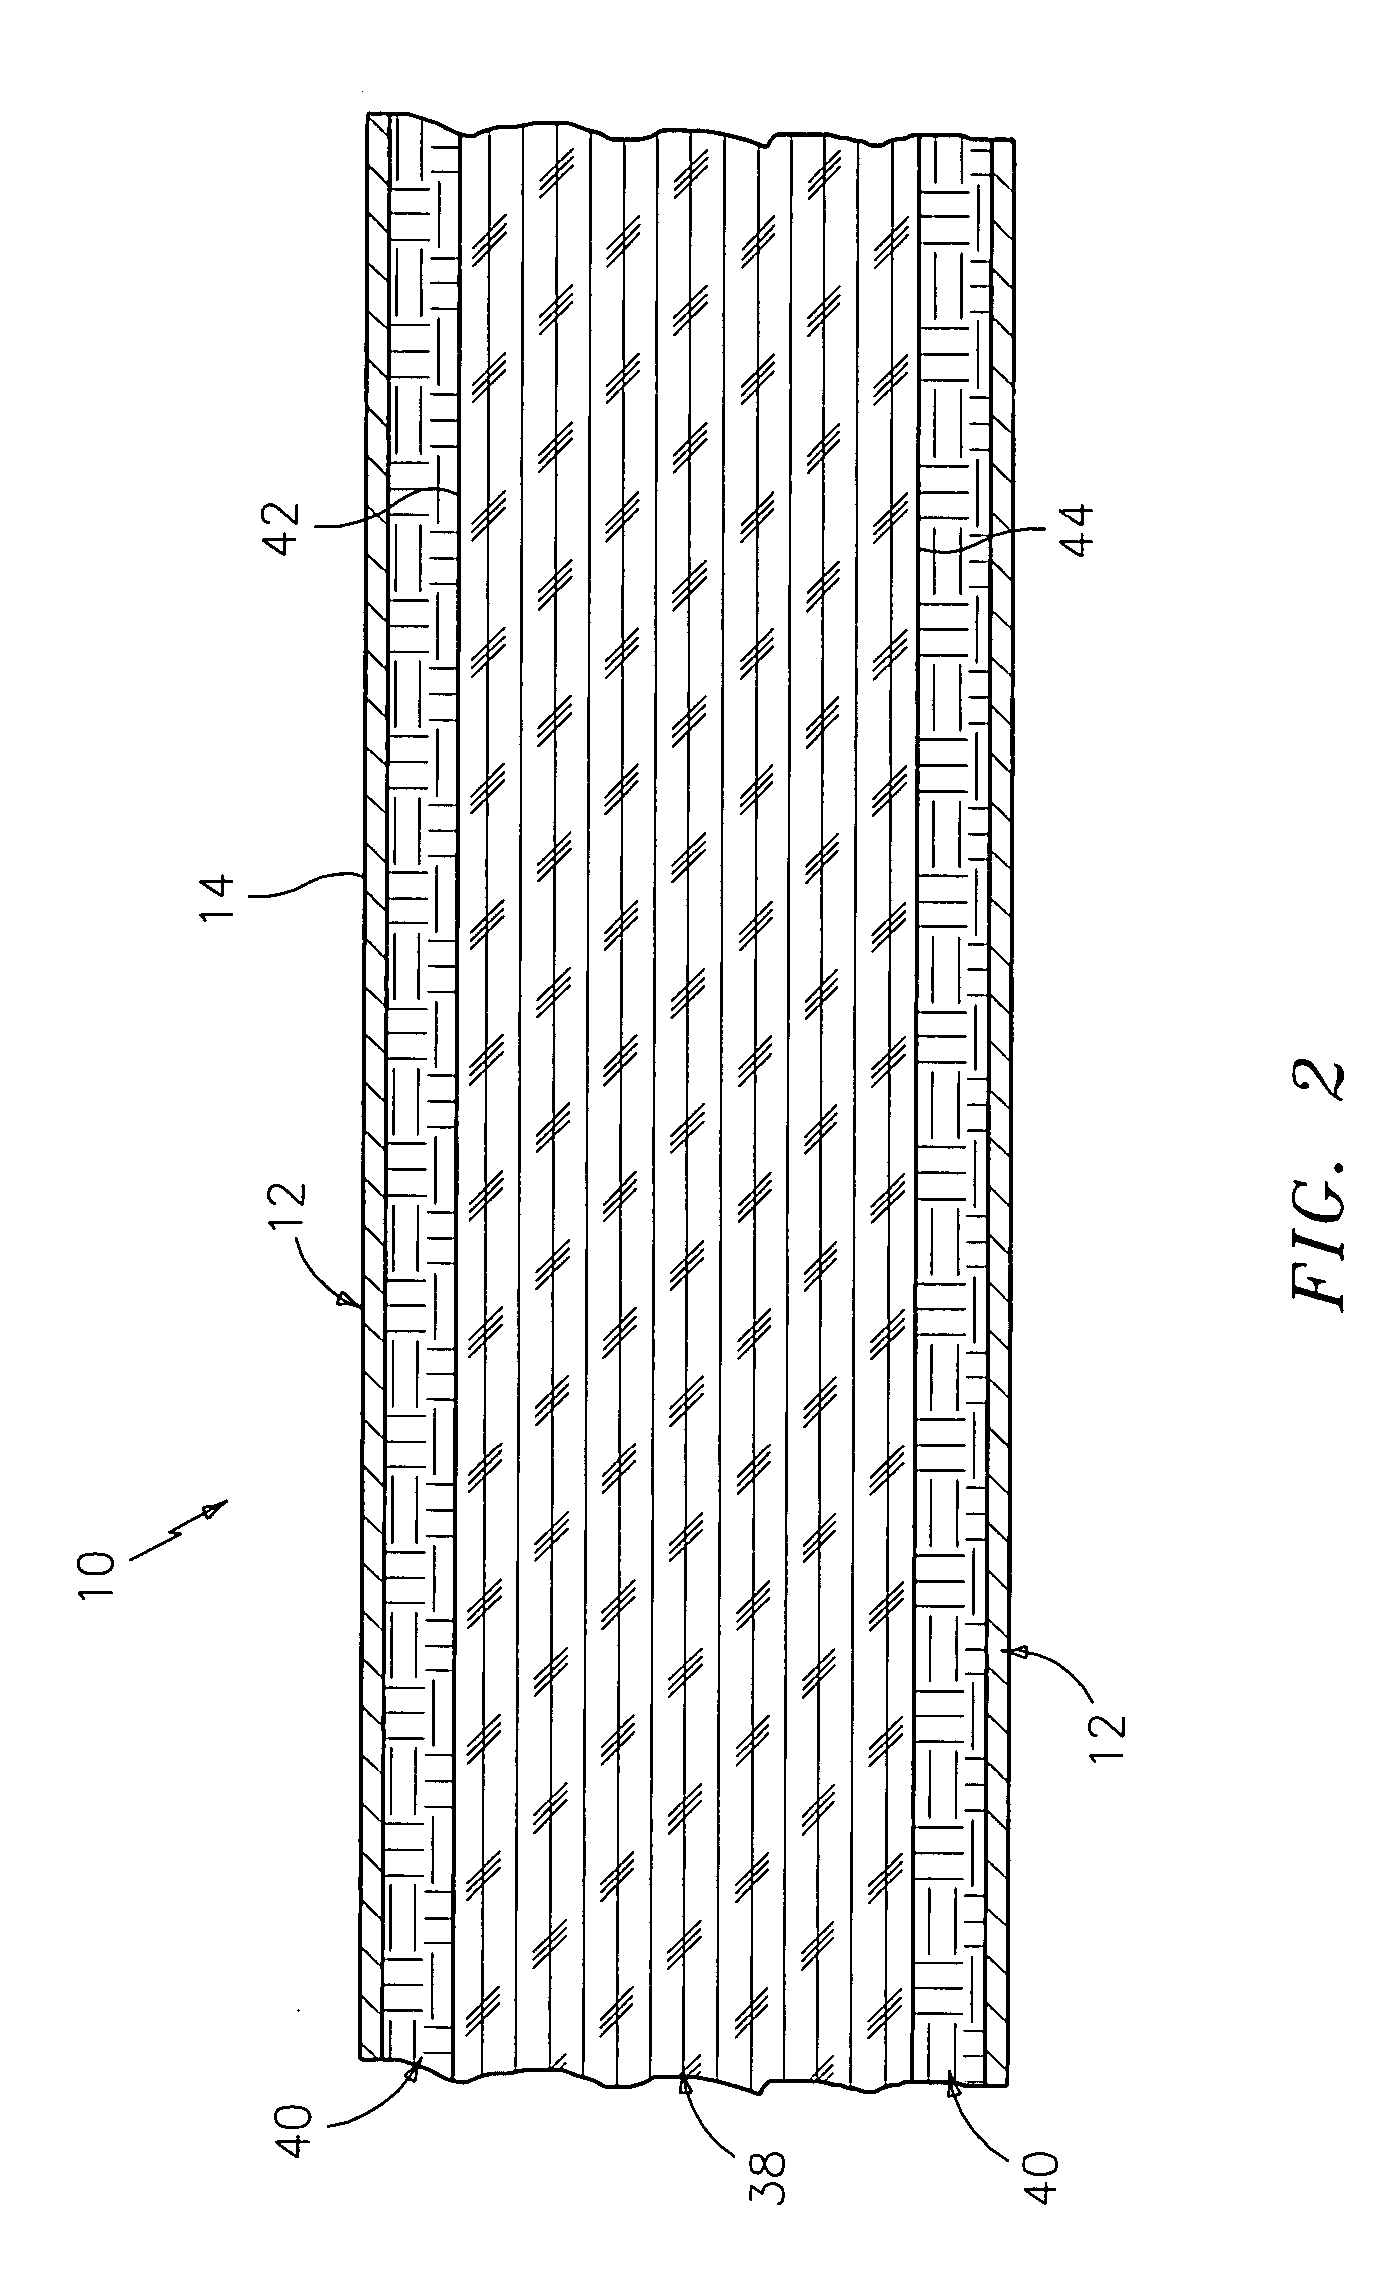 Panel Having a Chemical Resistant Work Surface